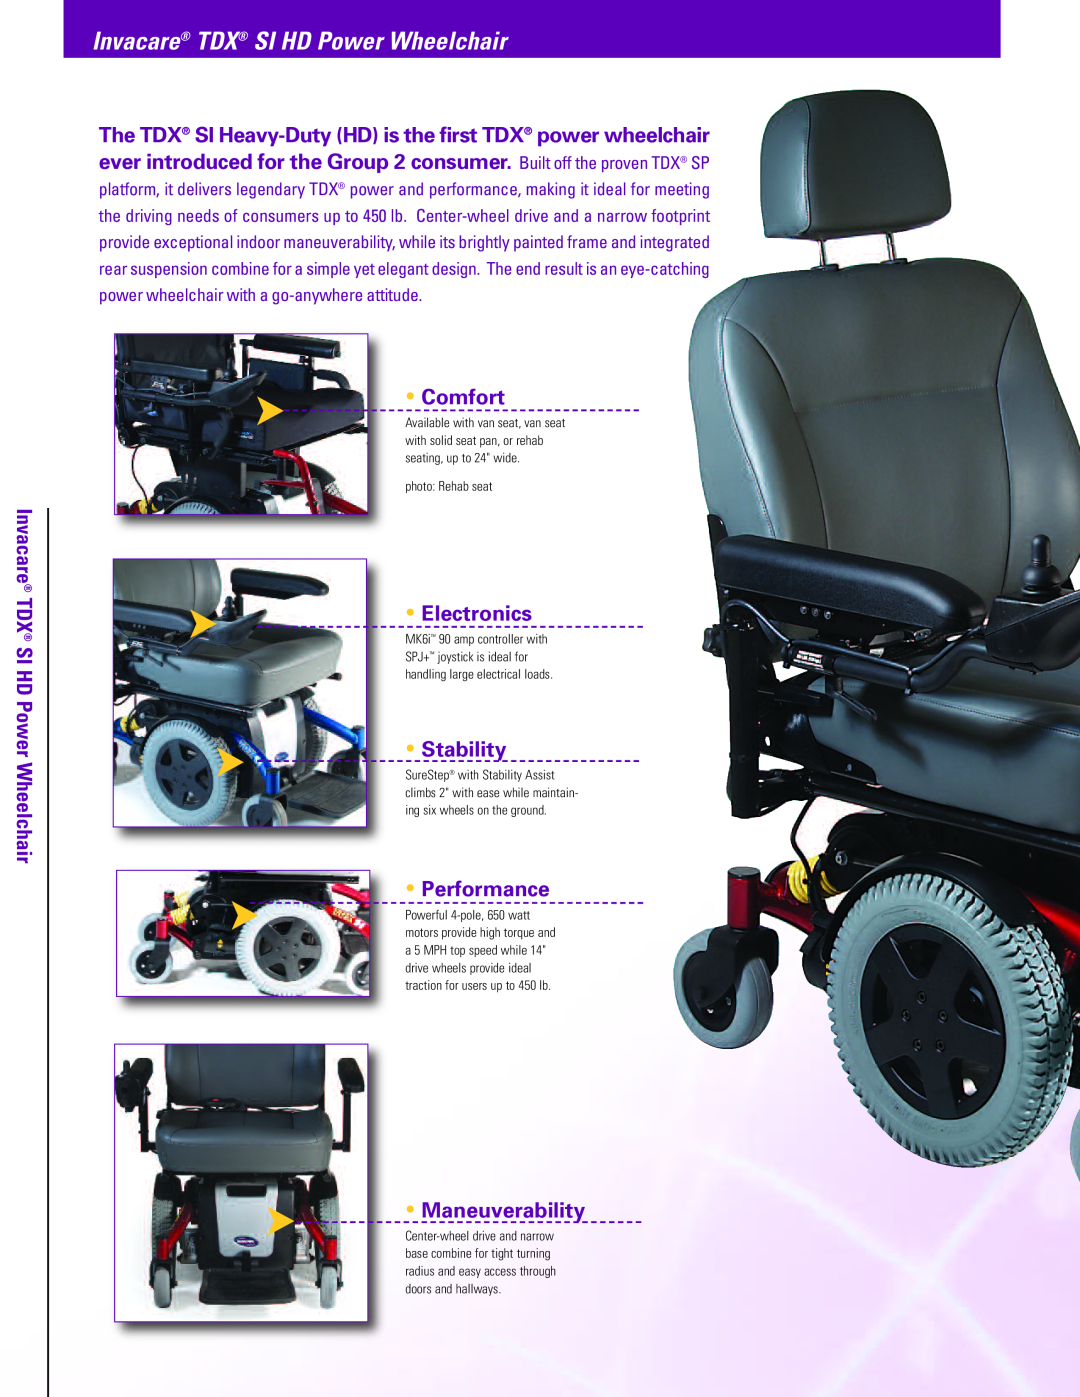 Invacare TDXSIV-HD-S manual Invacare TDX SI HD Power Wheelchair, The TDX SI Heavy-Duty HD is the first TDX power wheelchair 